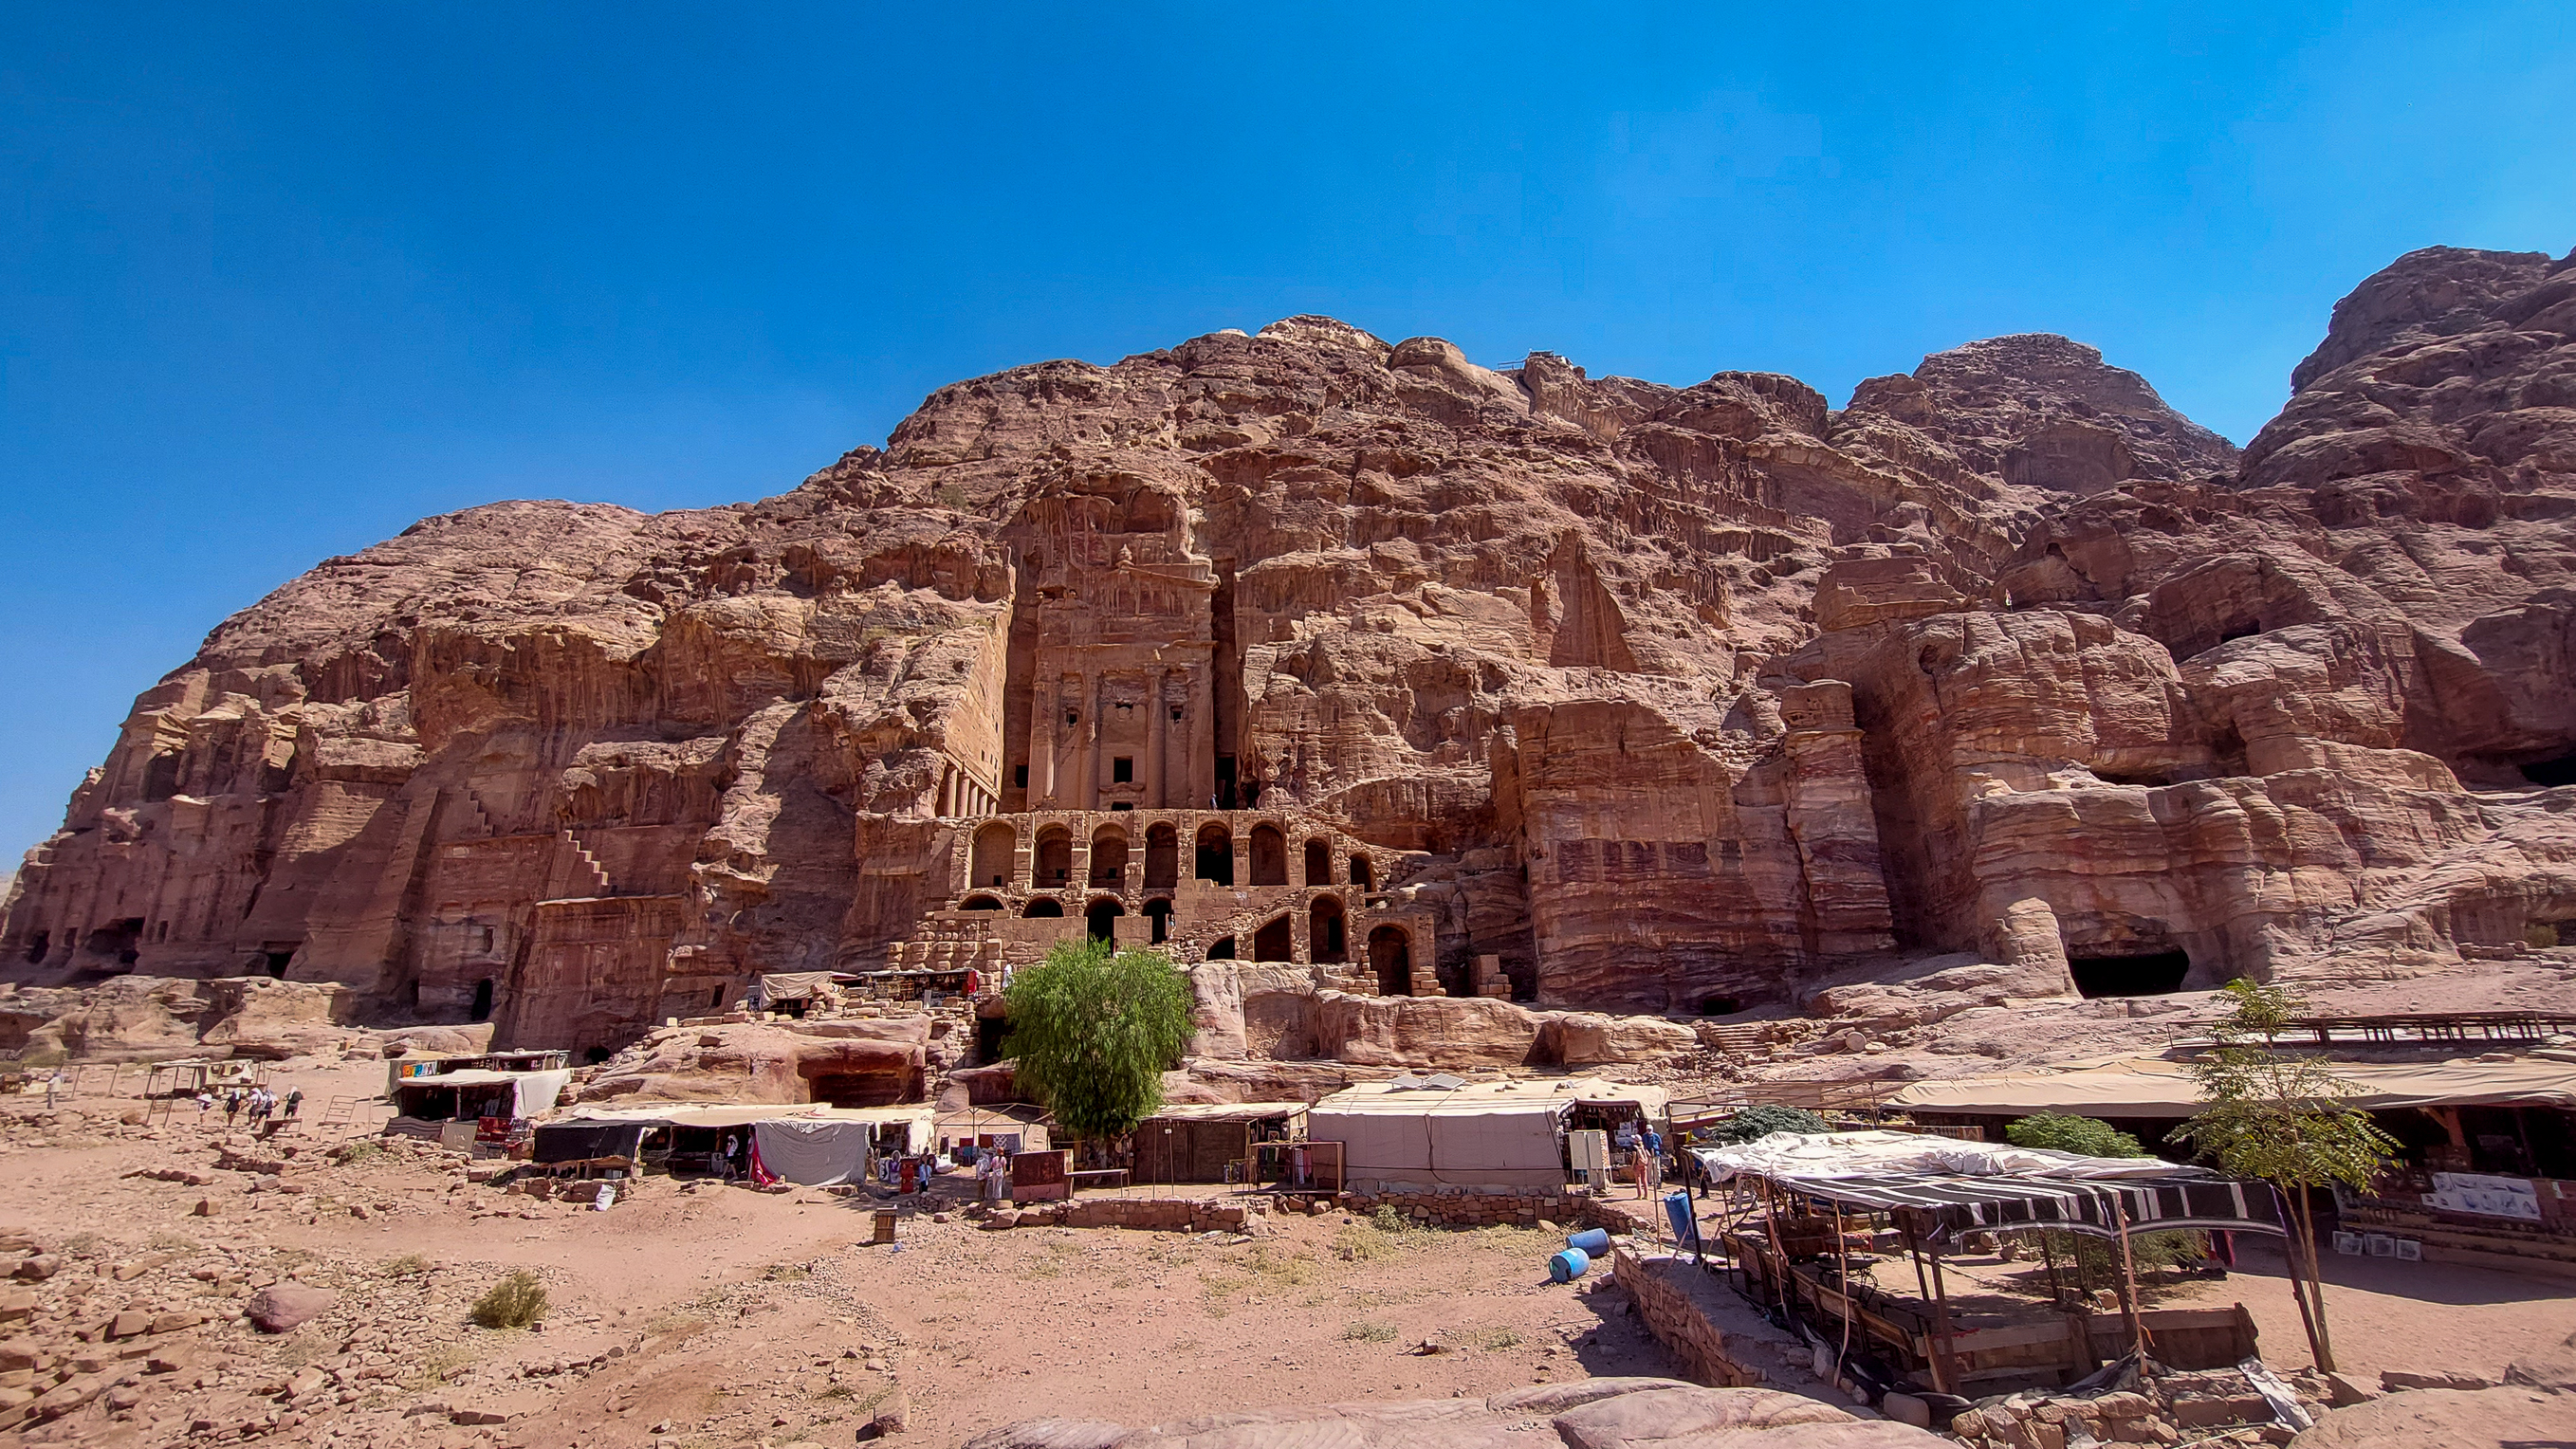 <span  class="uc_style_uc_tiles_grid_image_elementor_uc_items_attribute_title" style="color:#ffffff;">Petra, a city built into the mountains</span>